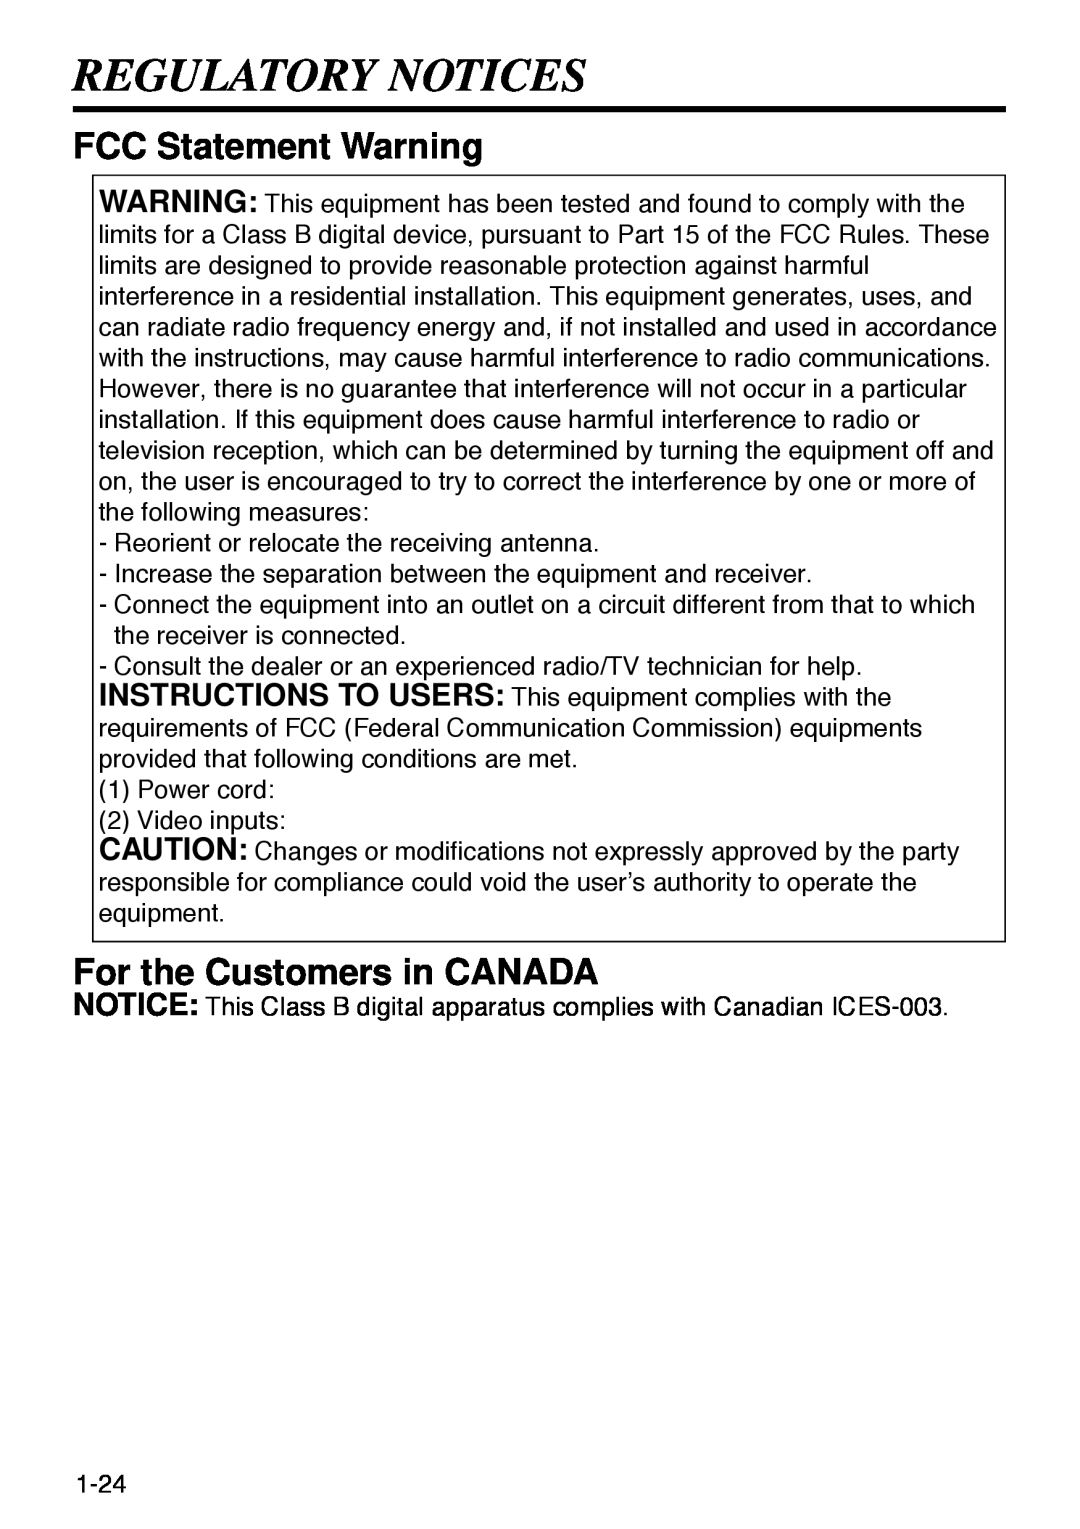 Polaroid SVGA 270 manual Regulatory Notices, FCC Statement Warning, For the Customers in CANADA 